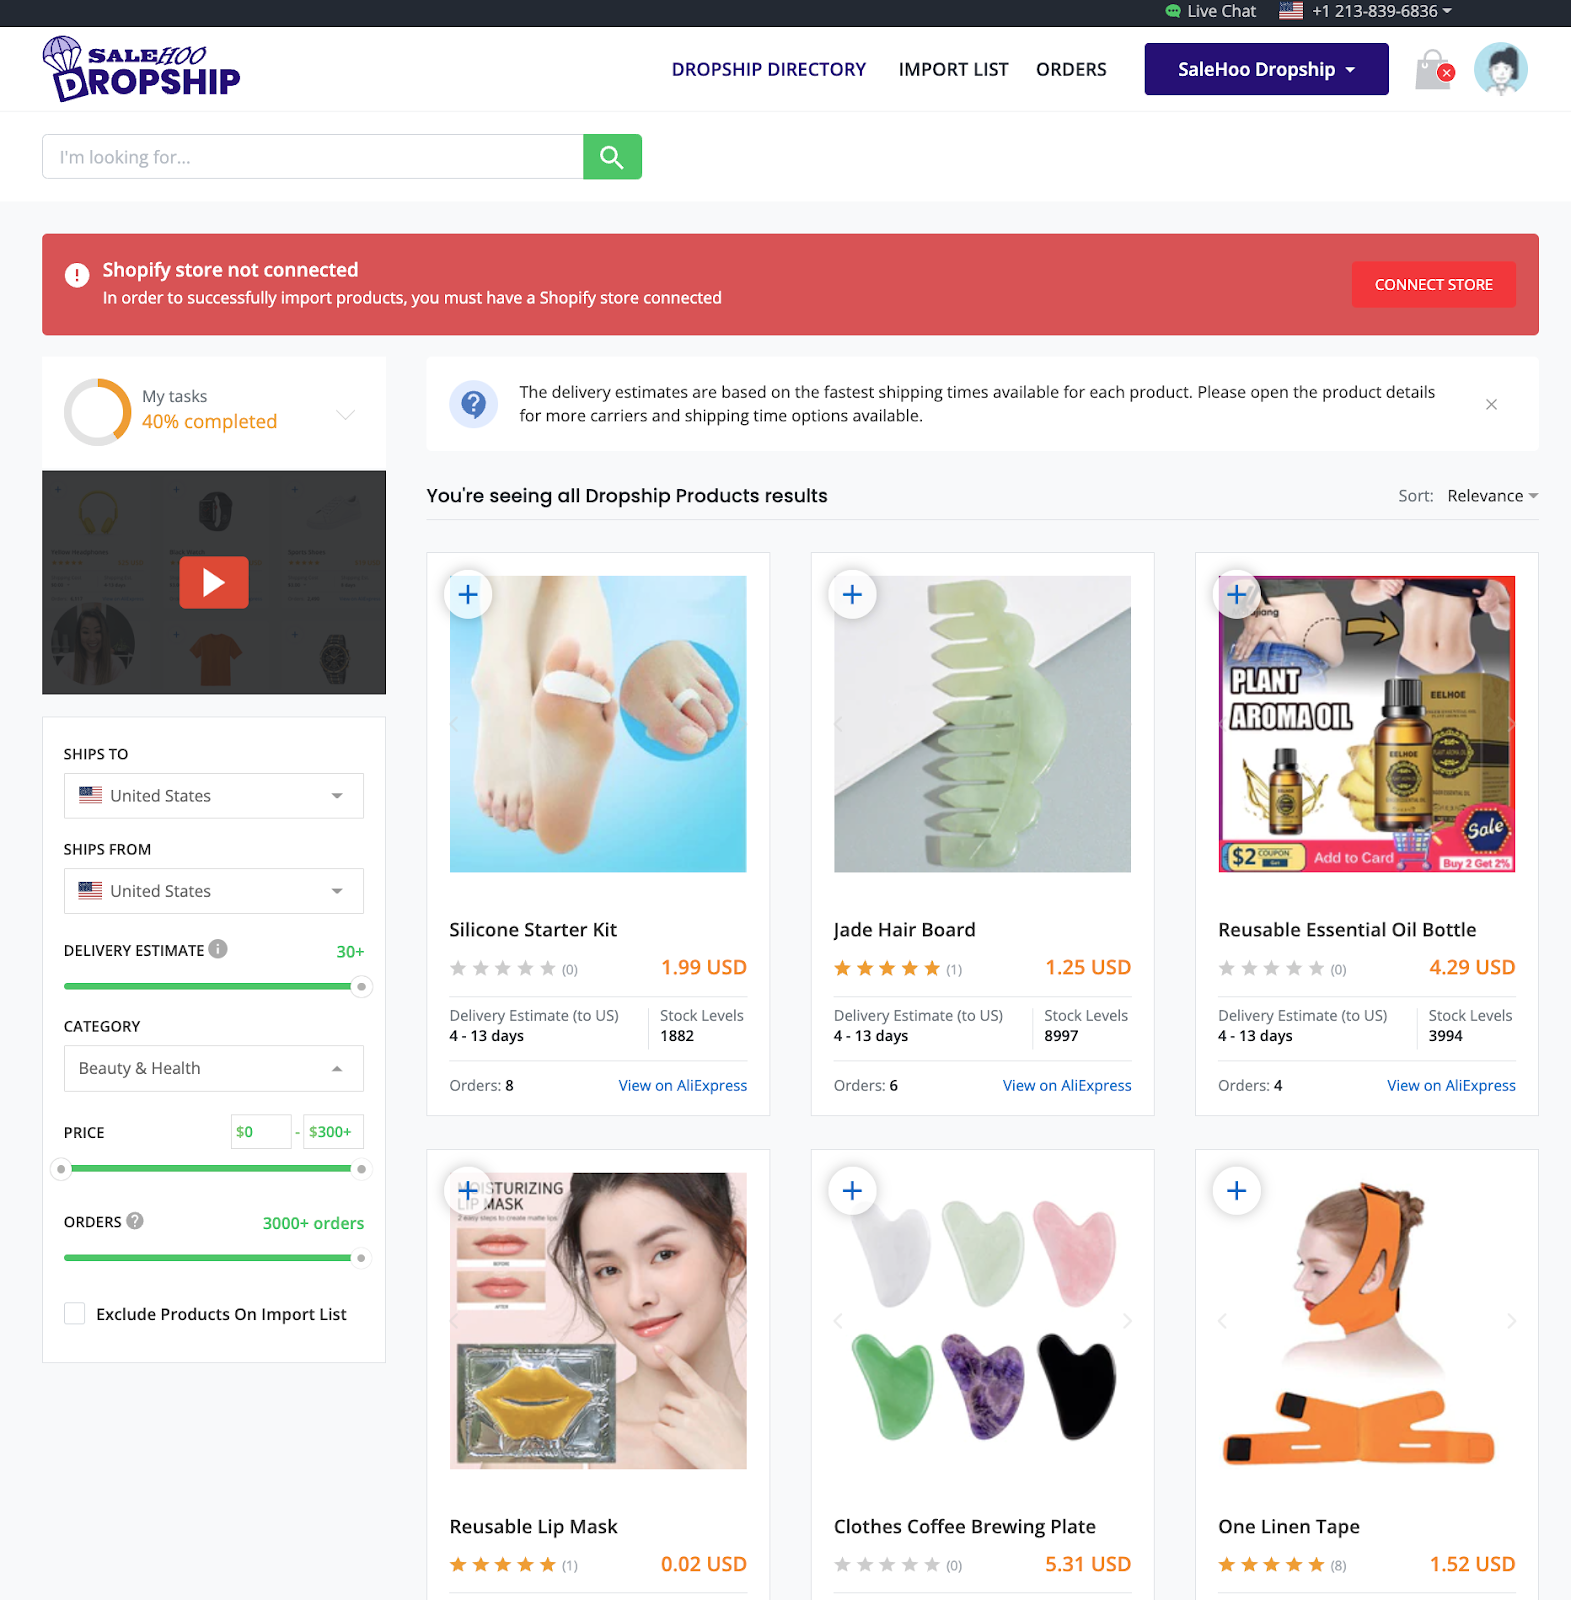 Market research tools for eCommerce business